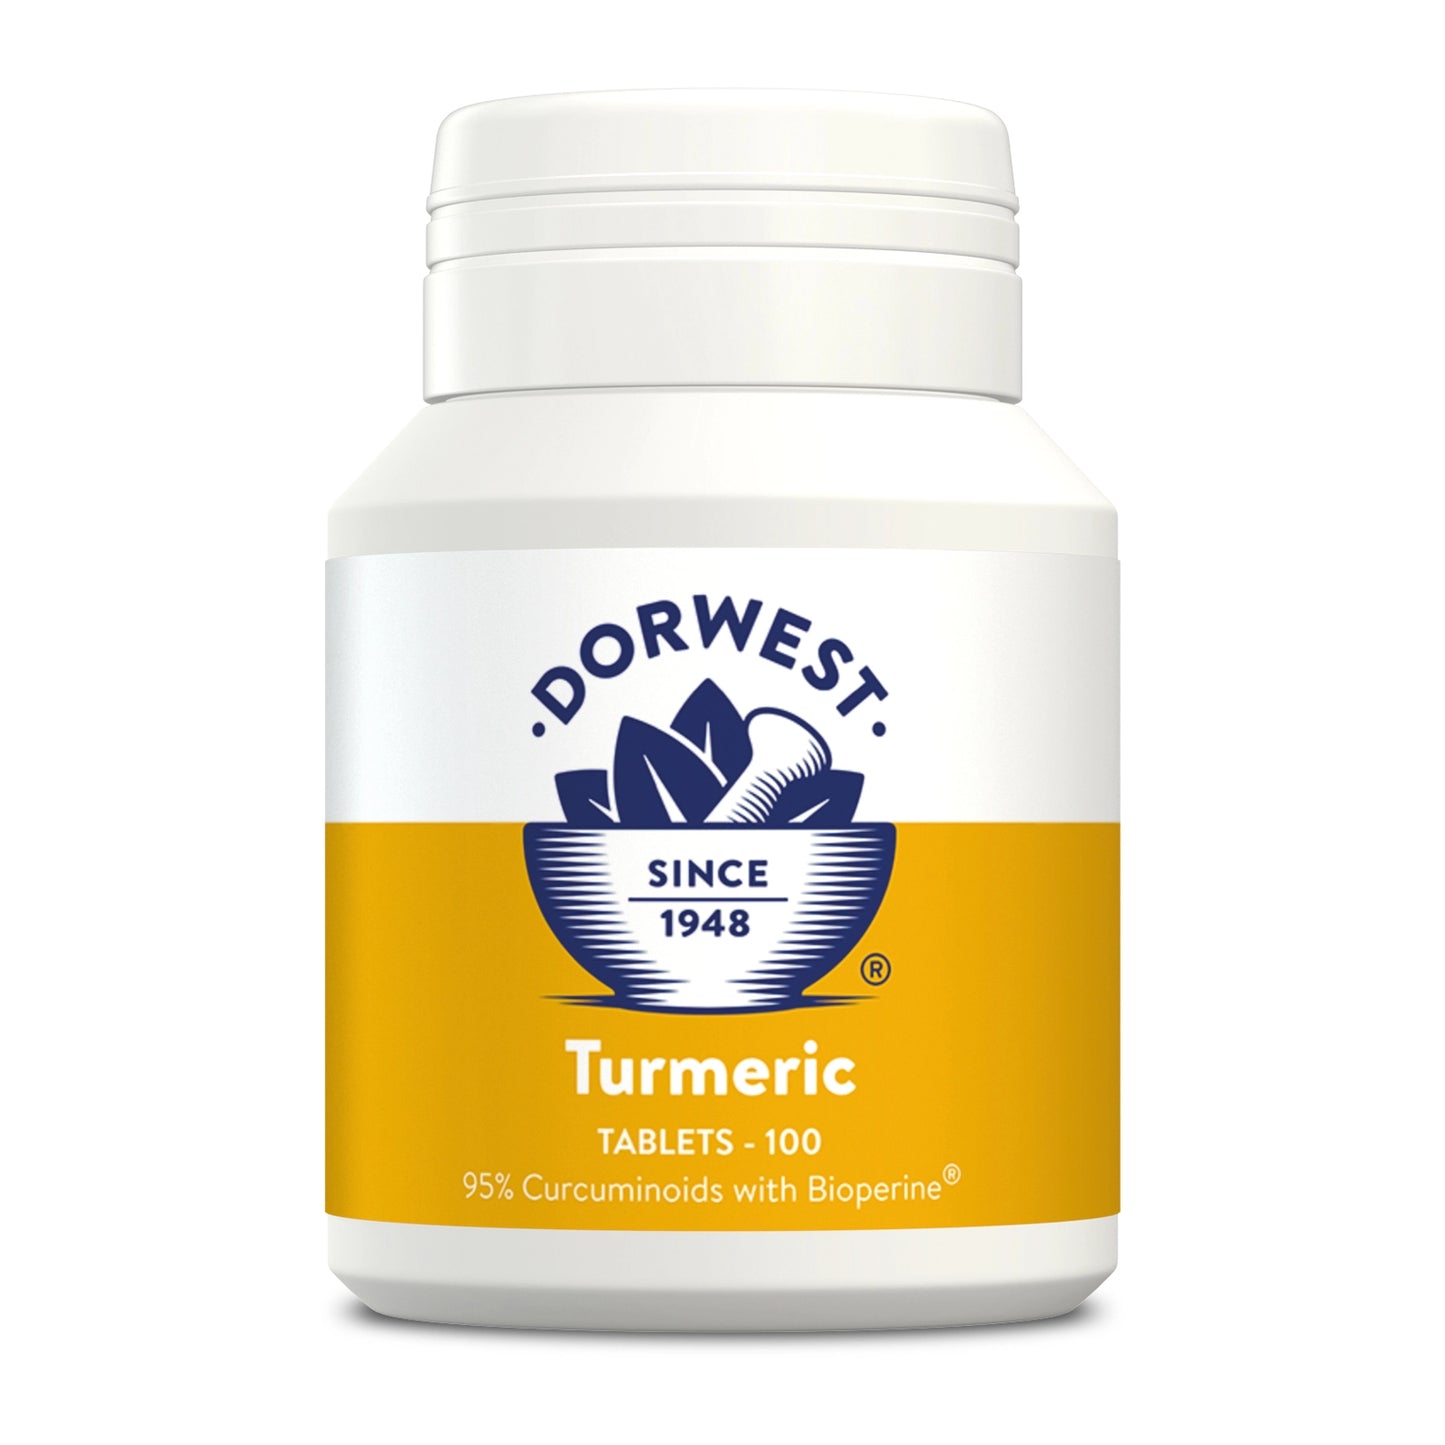 Dorwest Tumeric Tablets for Dogs & Cats - 100 Tablets